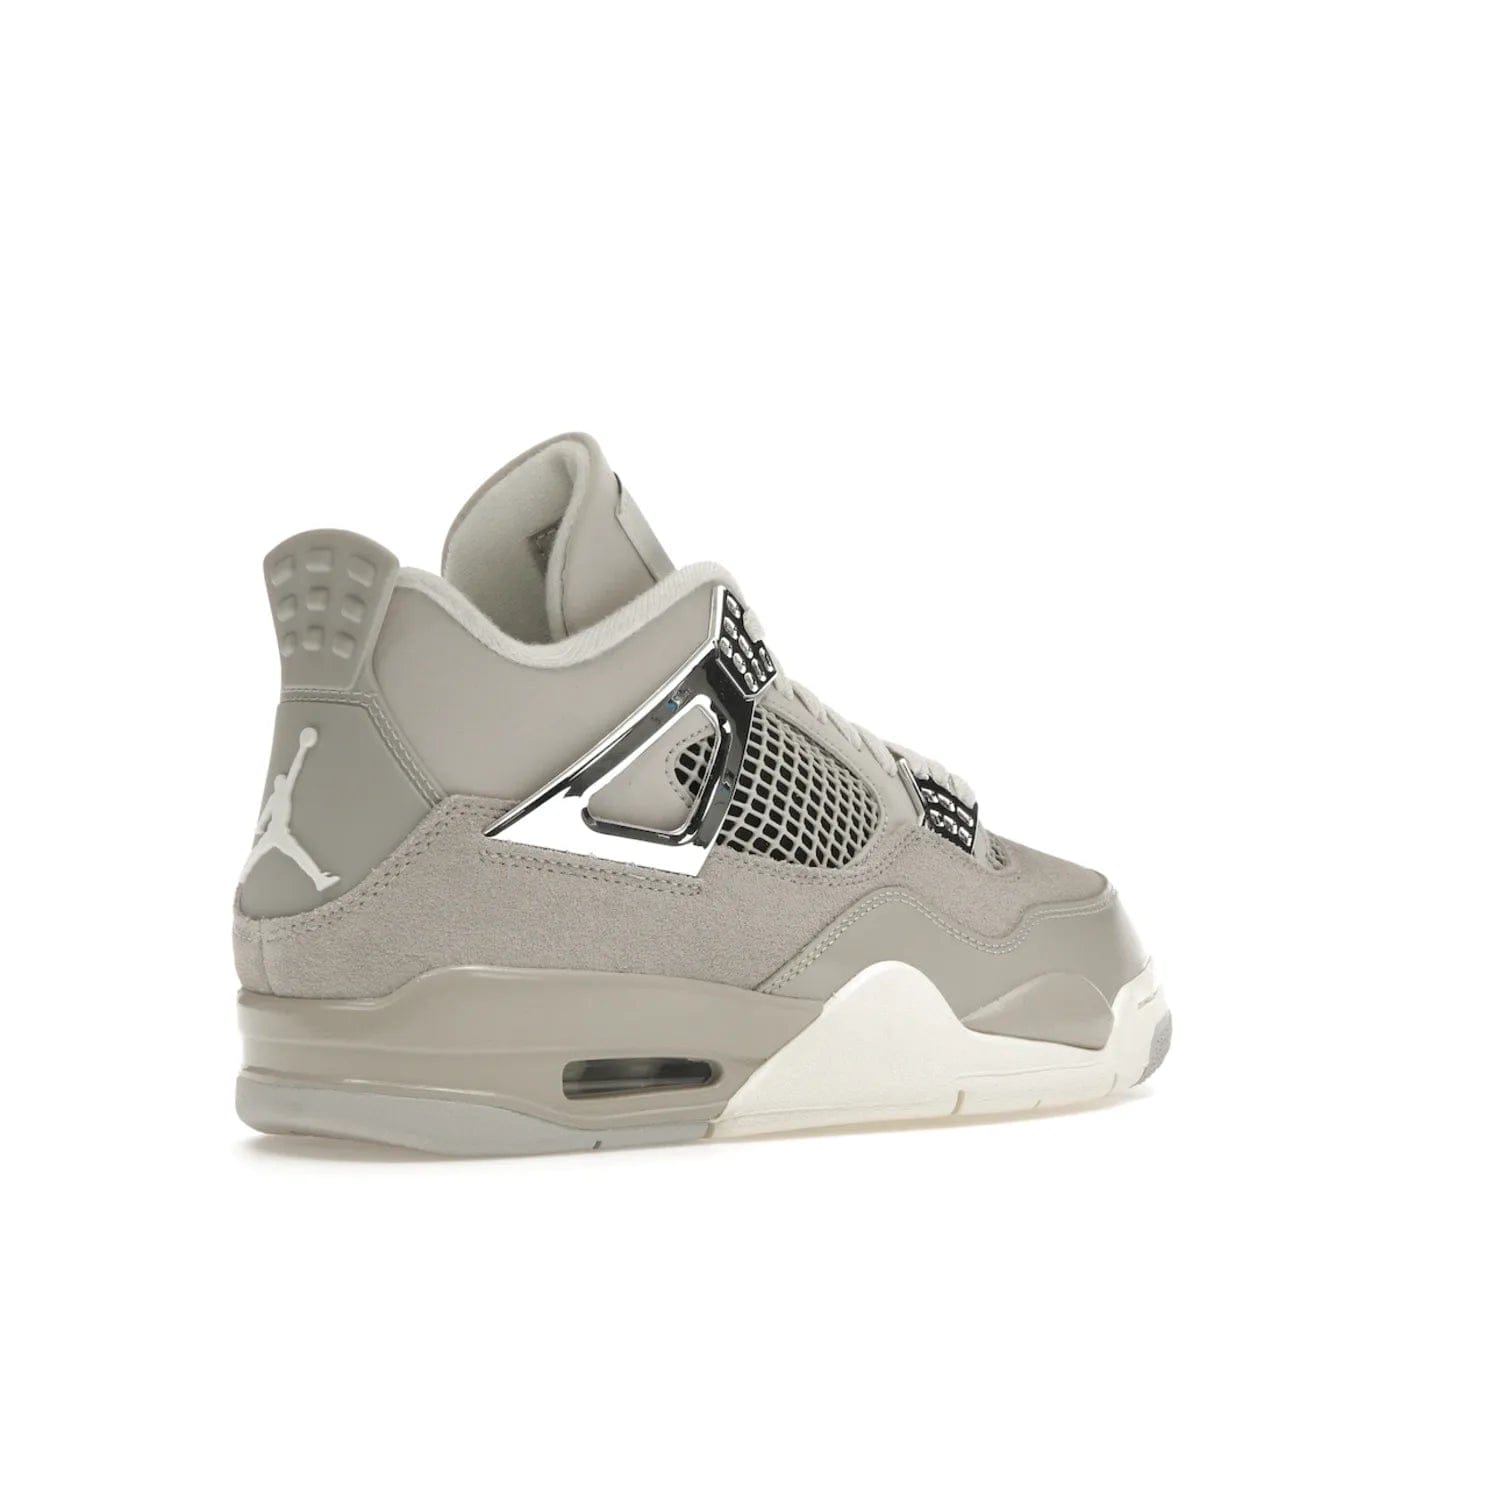 Jordan 4 Retro Frozen Moments (Women's) - Image 33 - Only at www.BallersClubKickz.com - The Jordan 4 Retro Frozen Moments is a stylish blend of classic design elements and modern tones. Featuring suede and leather overlays in a light iron-ore, sail, neutral grey, black, and metallic silver colorway. Get this iconic high-performance sneaker for $210.